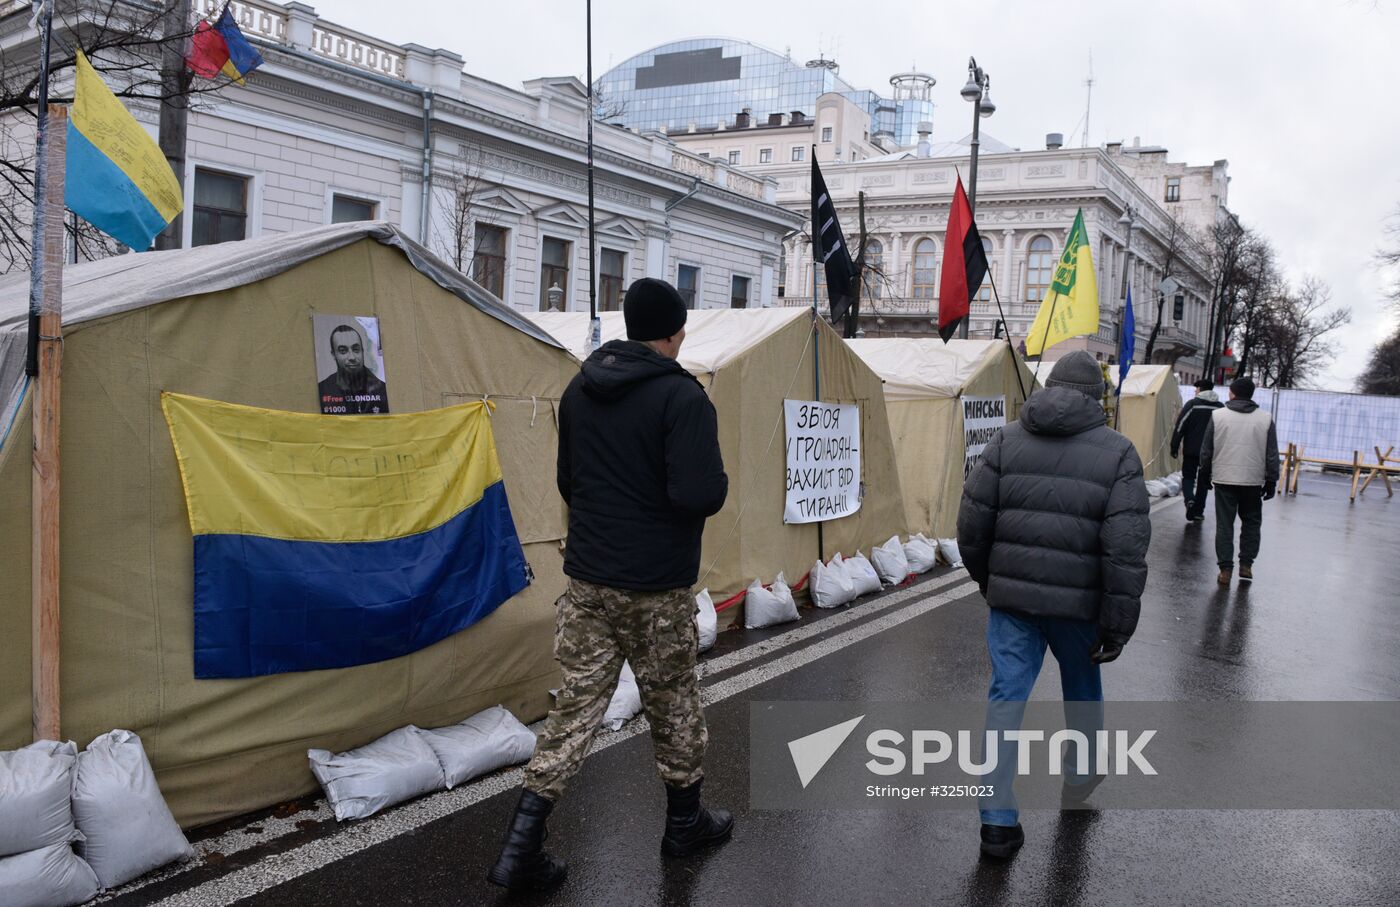 Supporters of Mikheil Saakashvili set up tent camp in the center of Kiev